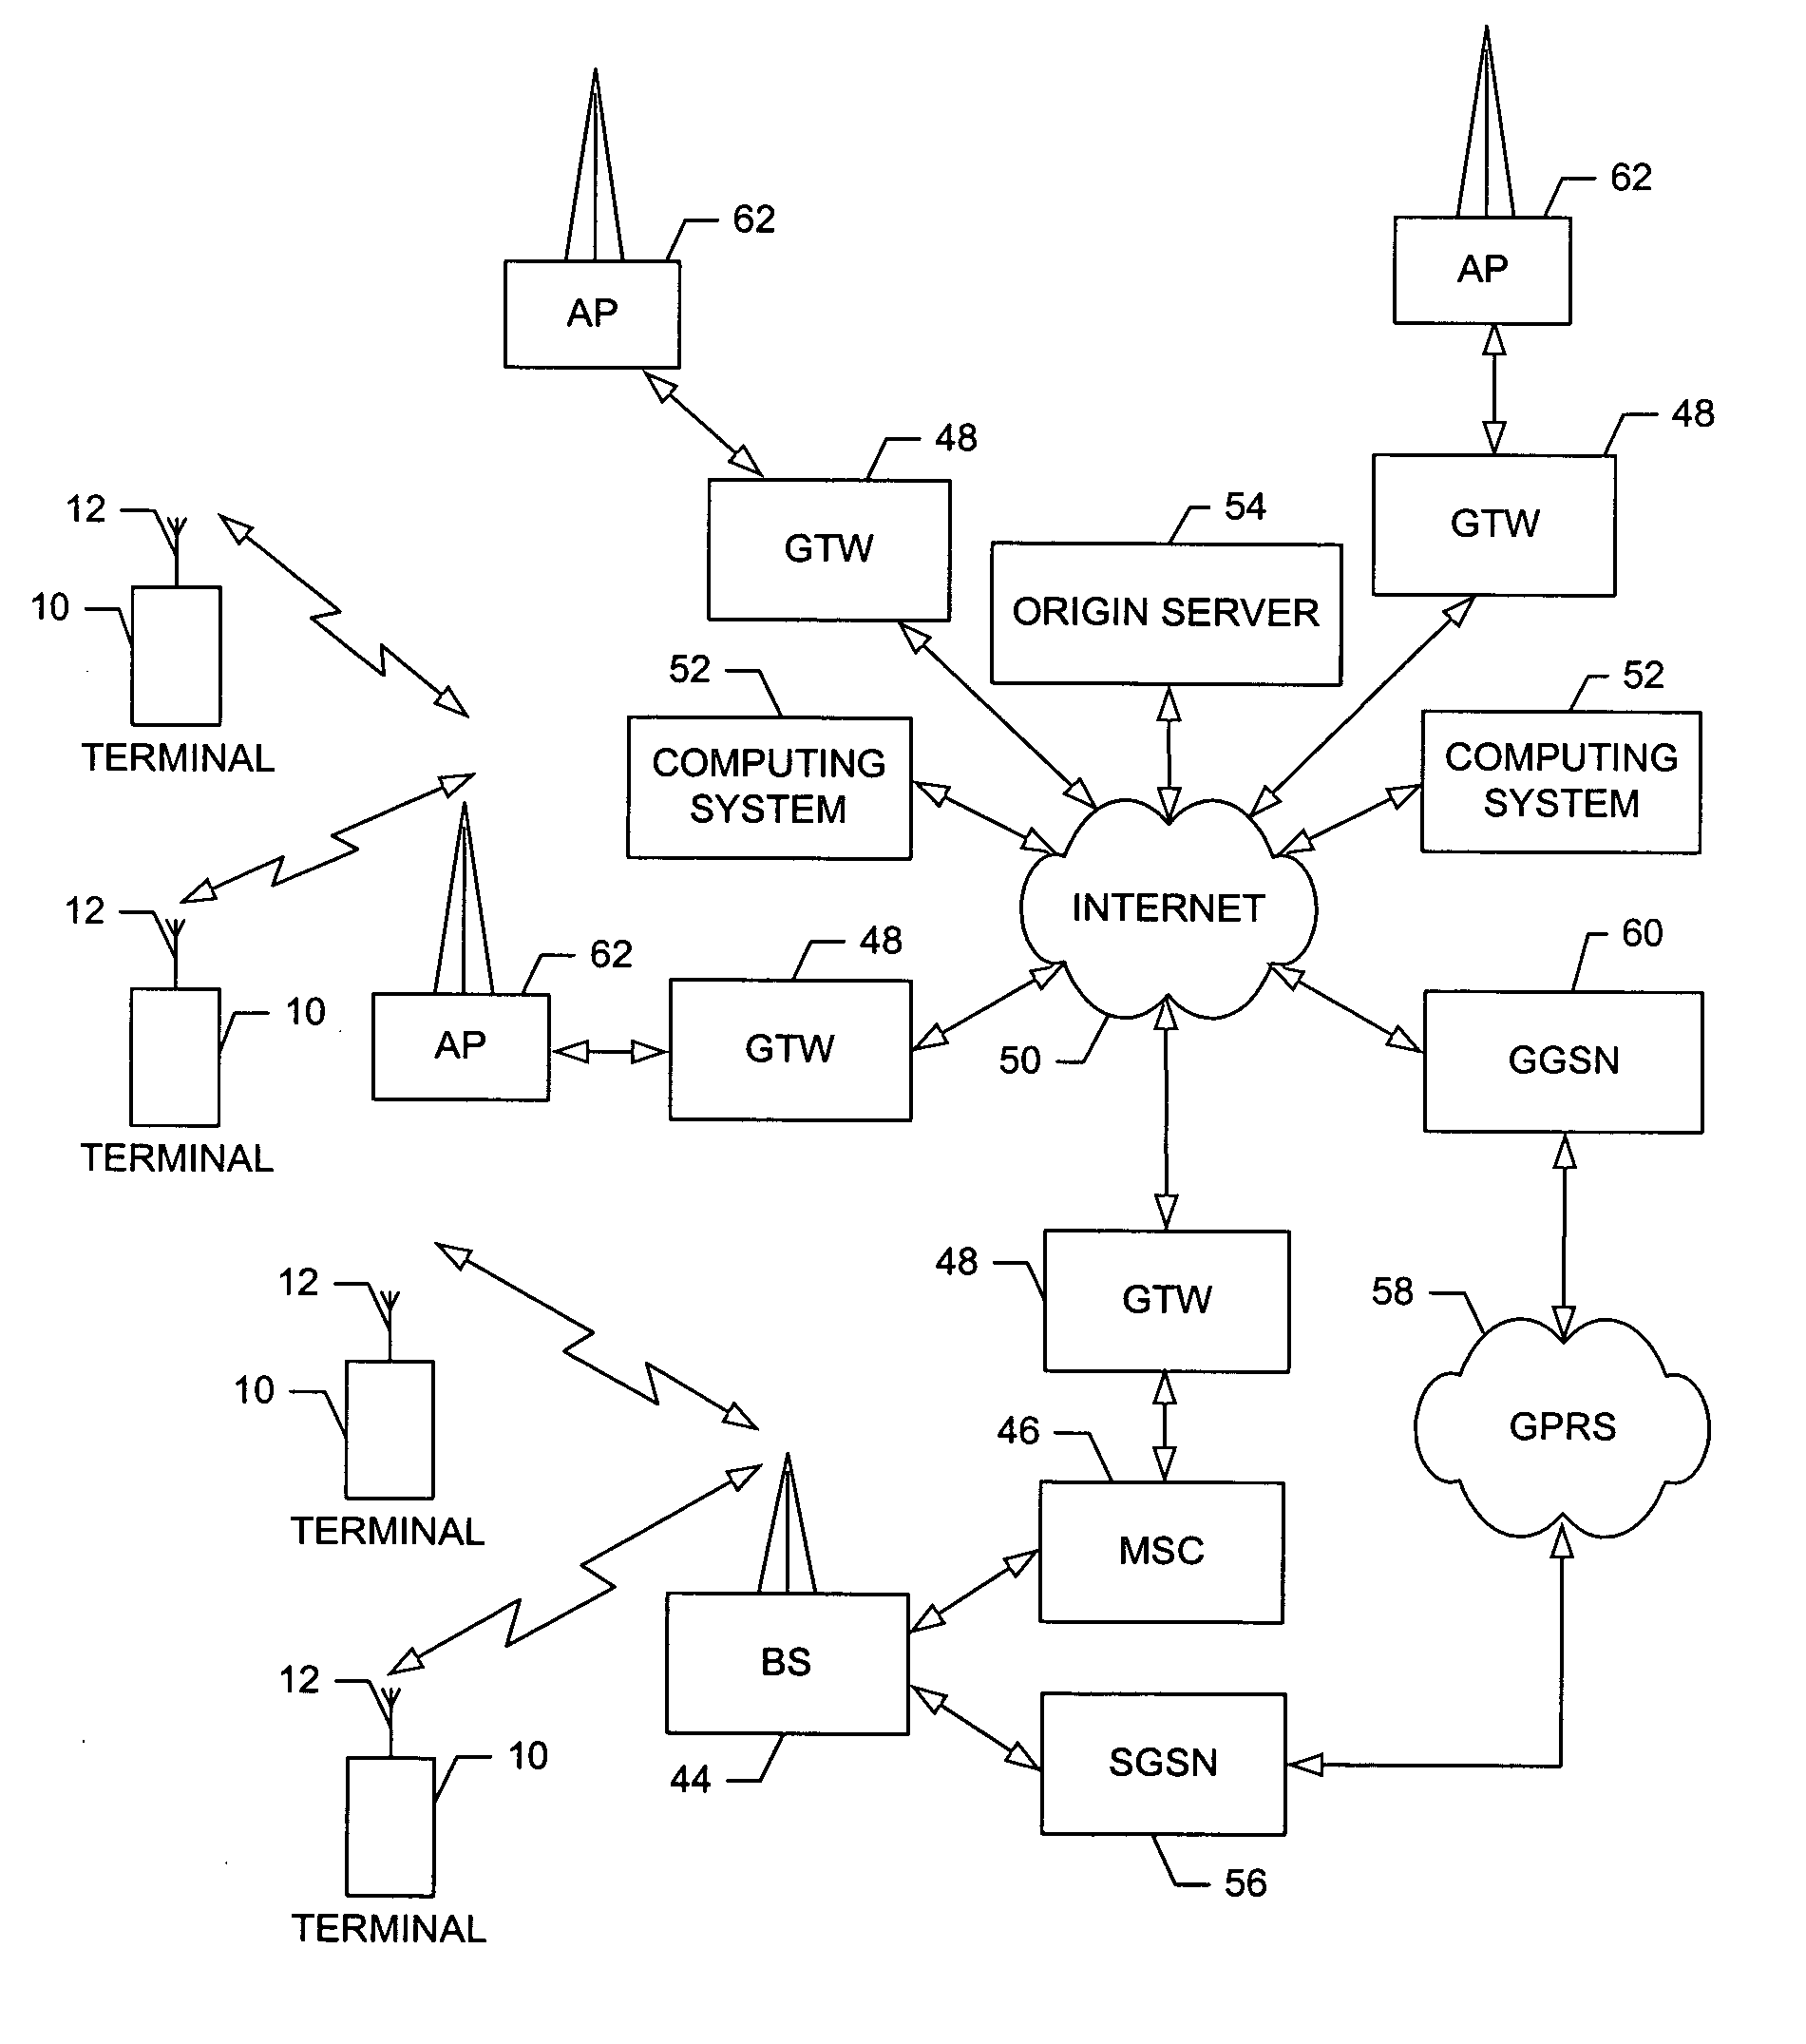 Method, apparatus and computer program product for providing a consistent virtual entity